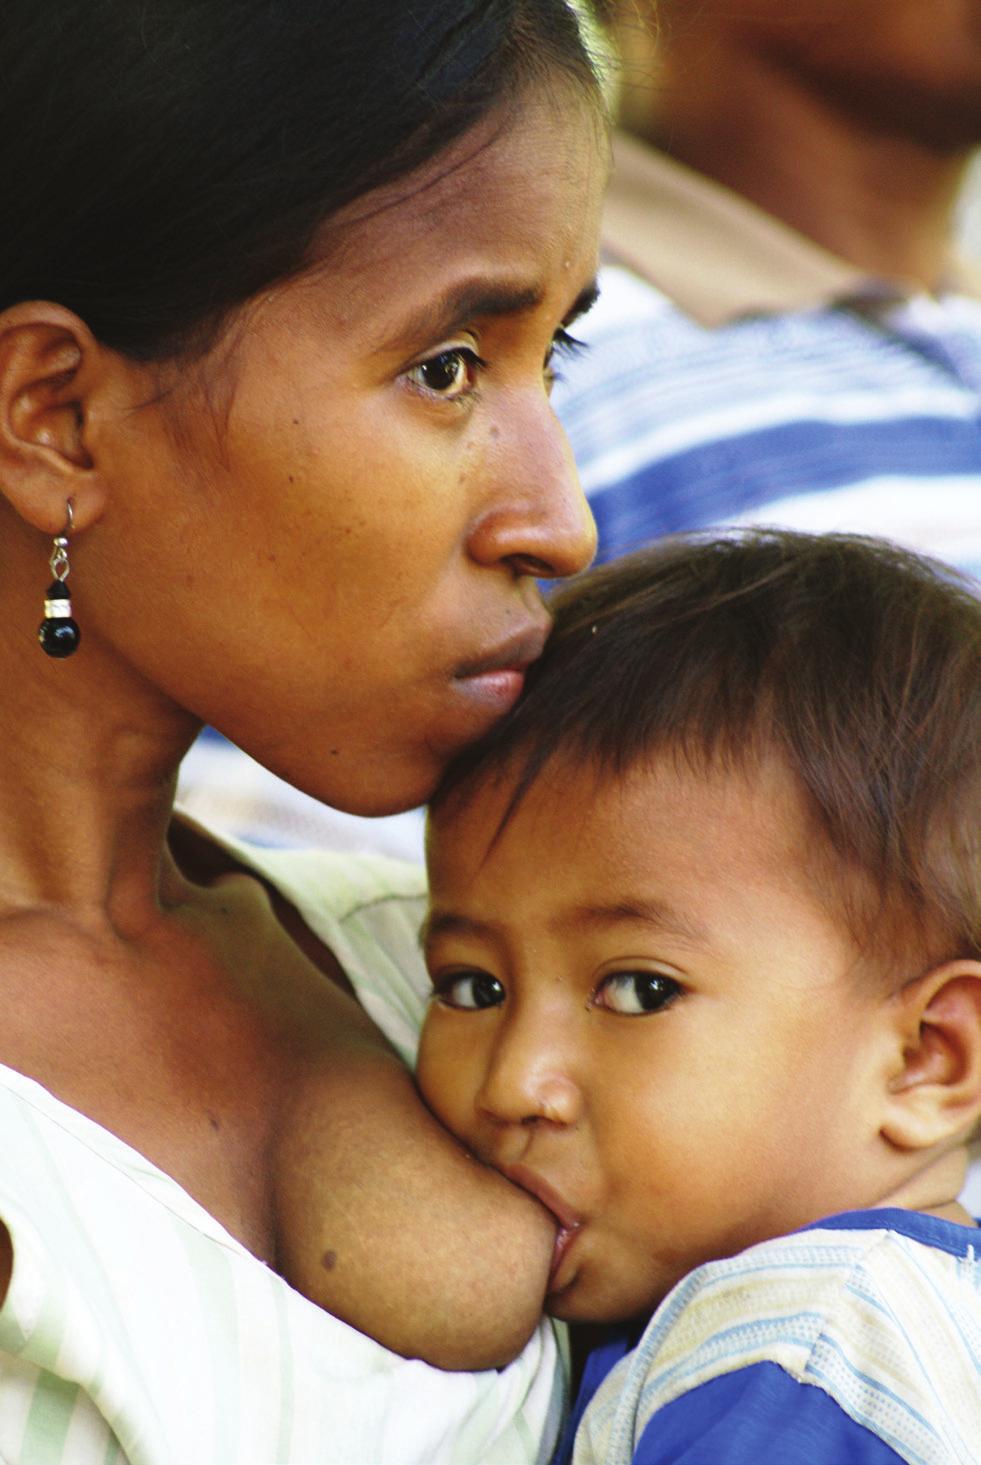 Feeding Practices and Supplementation Breastfeeding and the Introduction of Complementary Foods Breastfeeding in Timor-Leste is very common, with 96% of children ever breastfed.